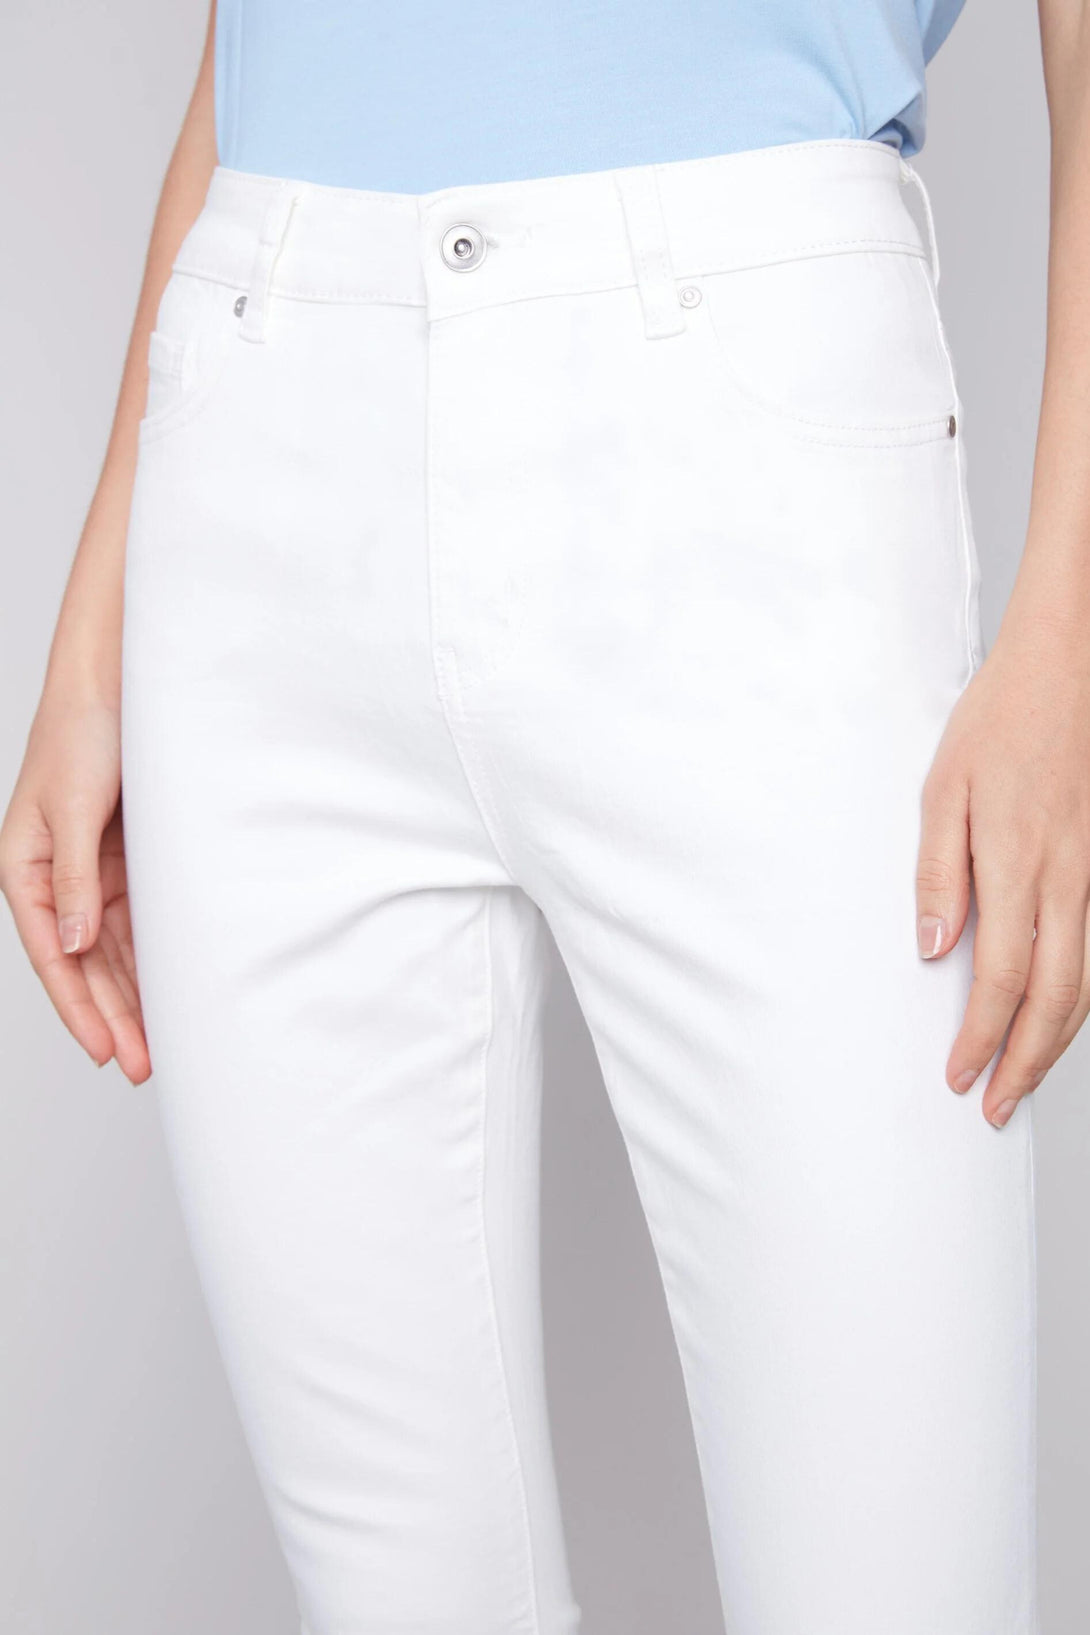 Charlie B's Cropped Bootcut Twill Pants White